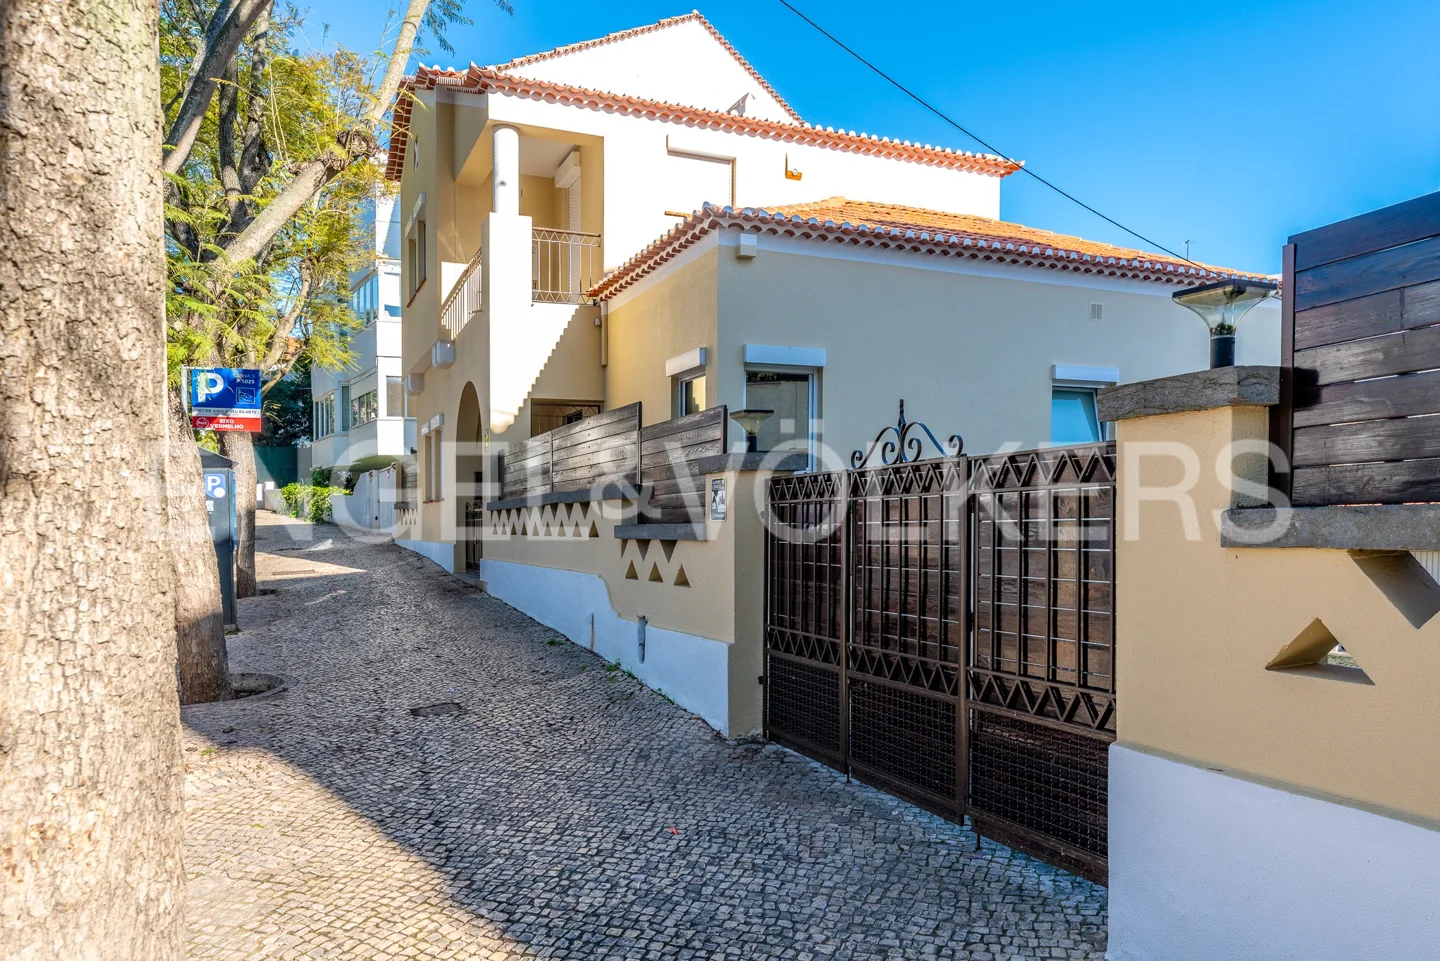 Townhouse to Invest in Cascais Historical Center